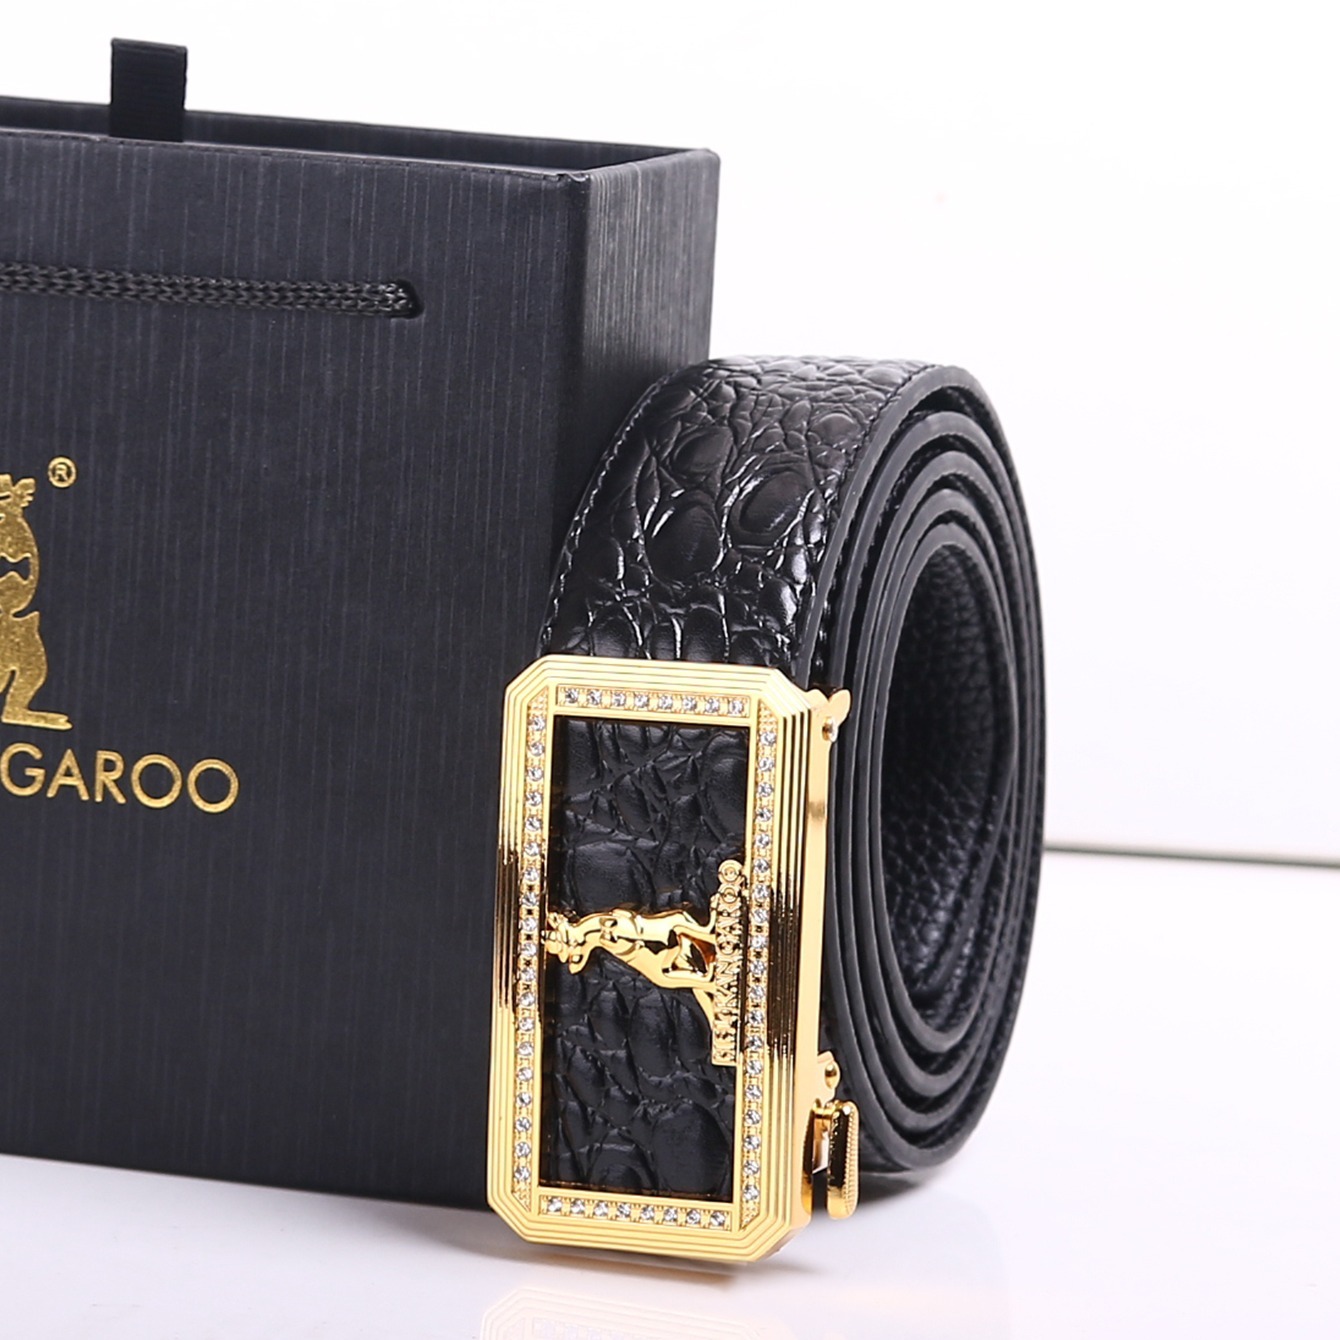 Buy Teakwood Leathers Black Croco Textured Leather Casual Belt for